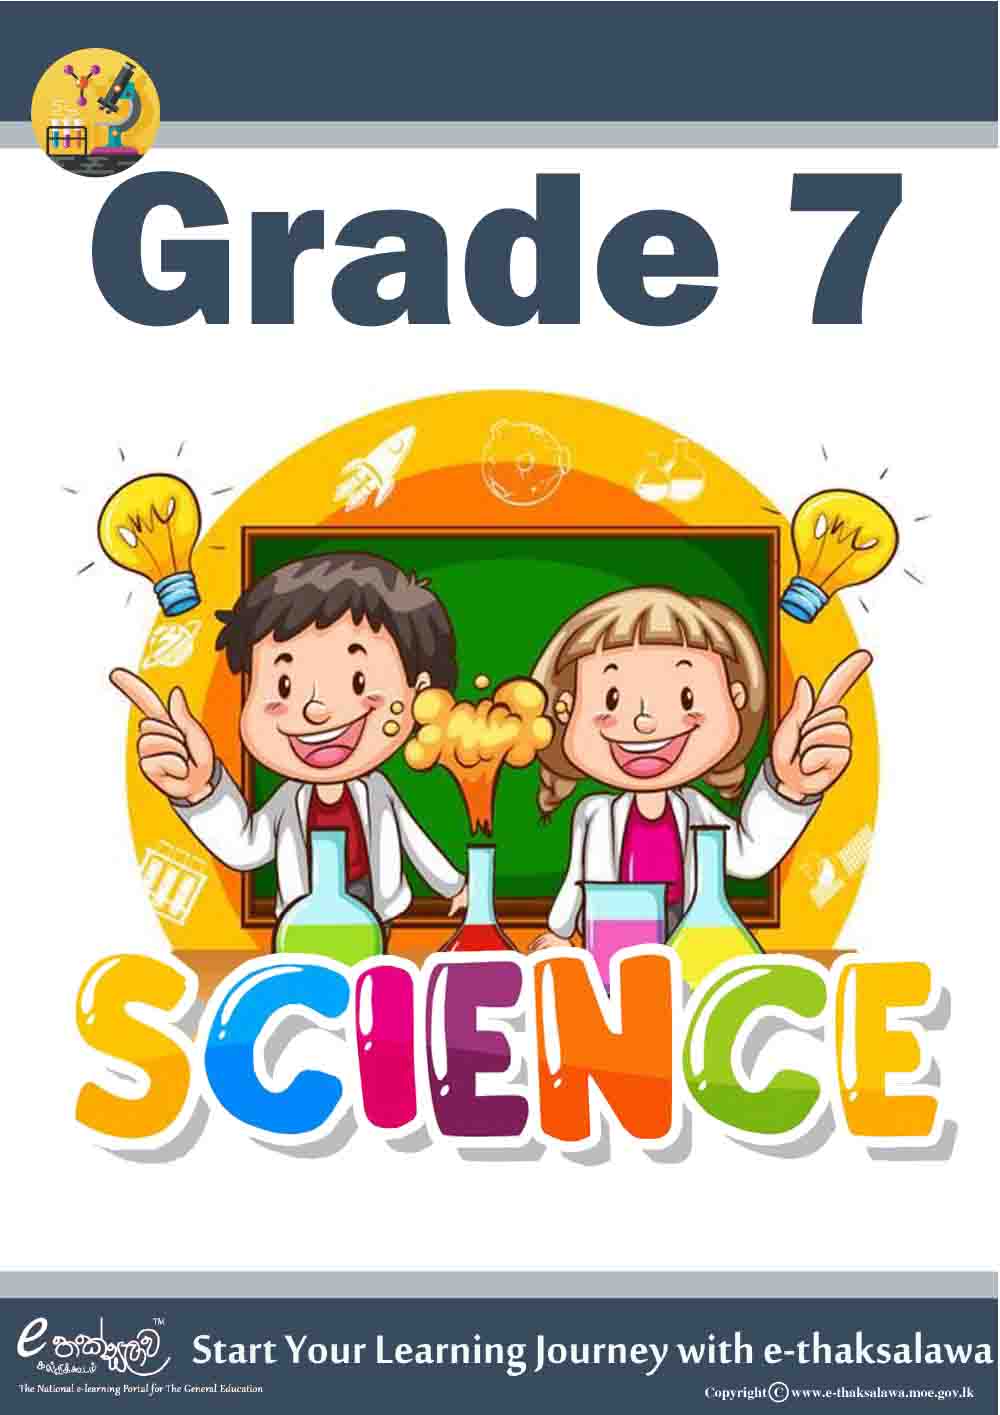 Download the Grade 07 Science Unit Test and term test papers from e-thaksalawa Education Platform